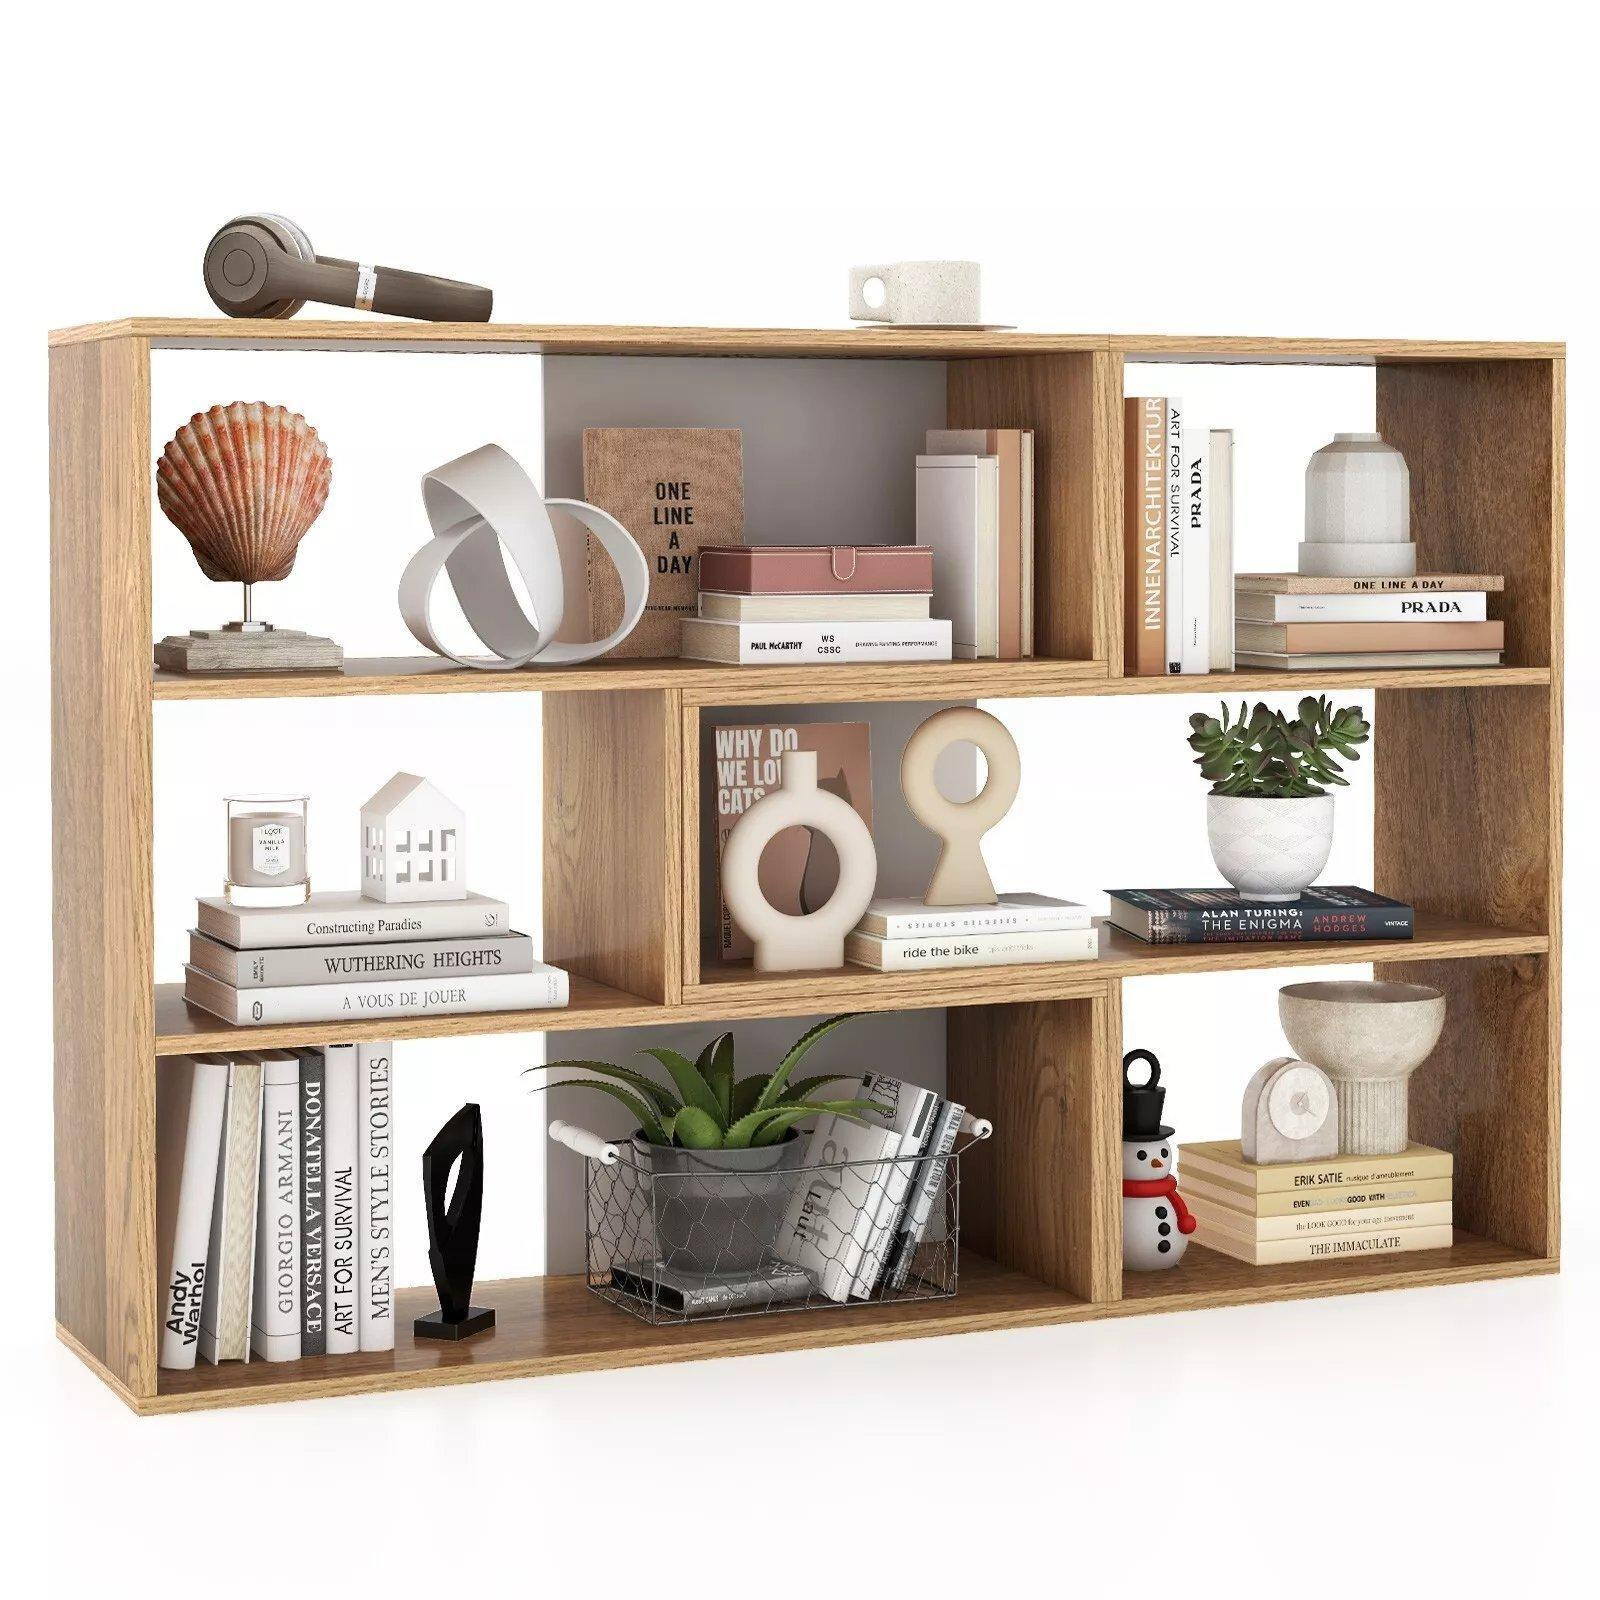 Wooden Storage Bookcase 6 Cube Open Bookshelf Home Office Display Cabinet Rack - image 1